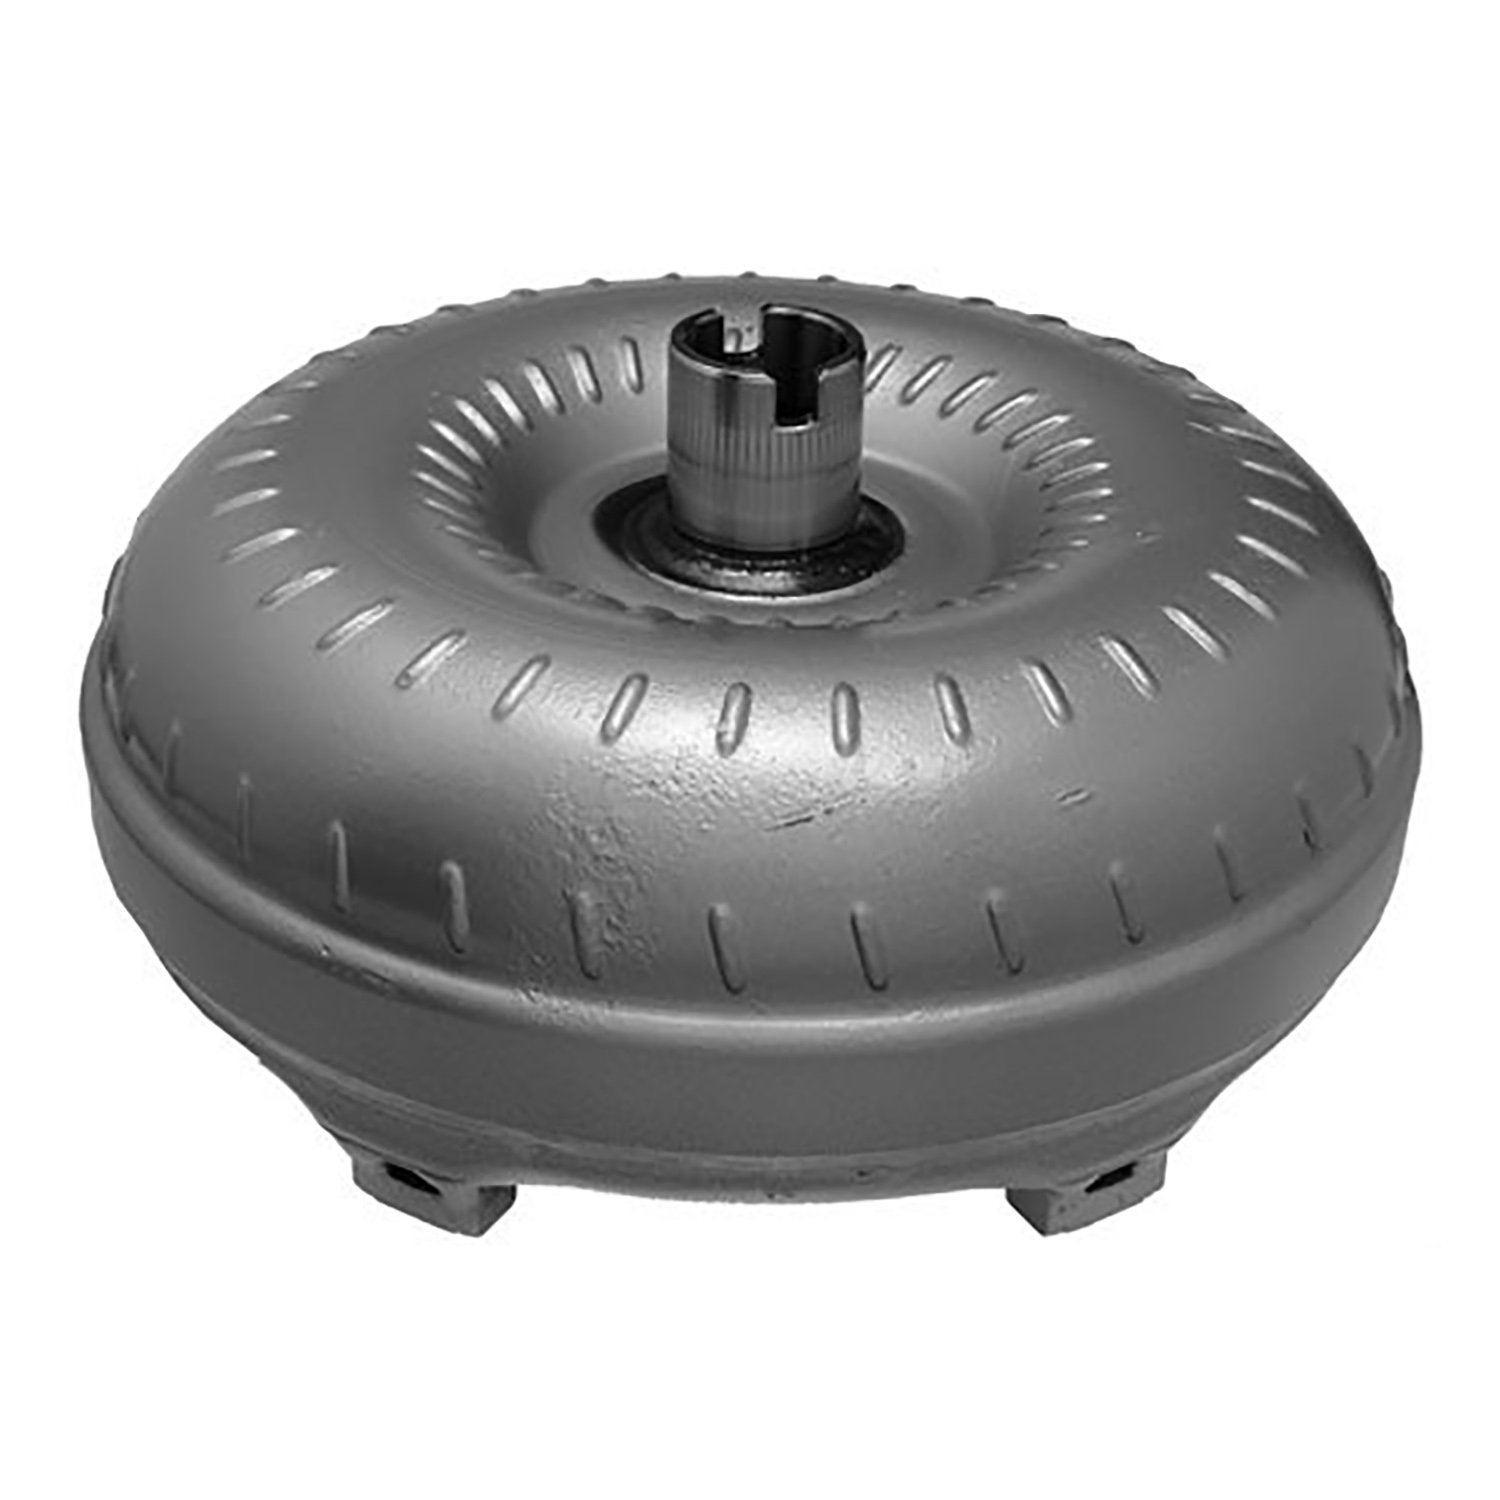 Remanufactured Automatic Transmission Torque Converter for GM TH400 65-86 6 Bolt